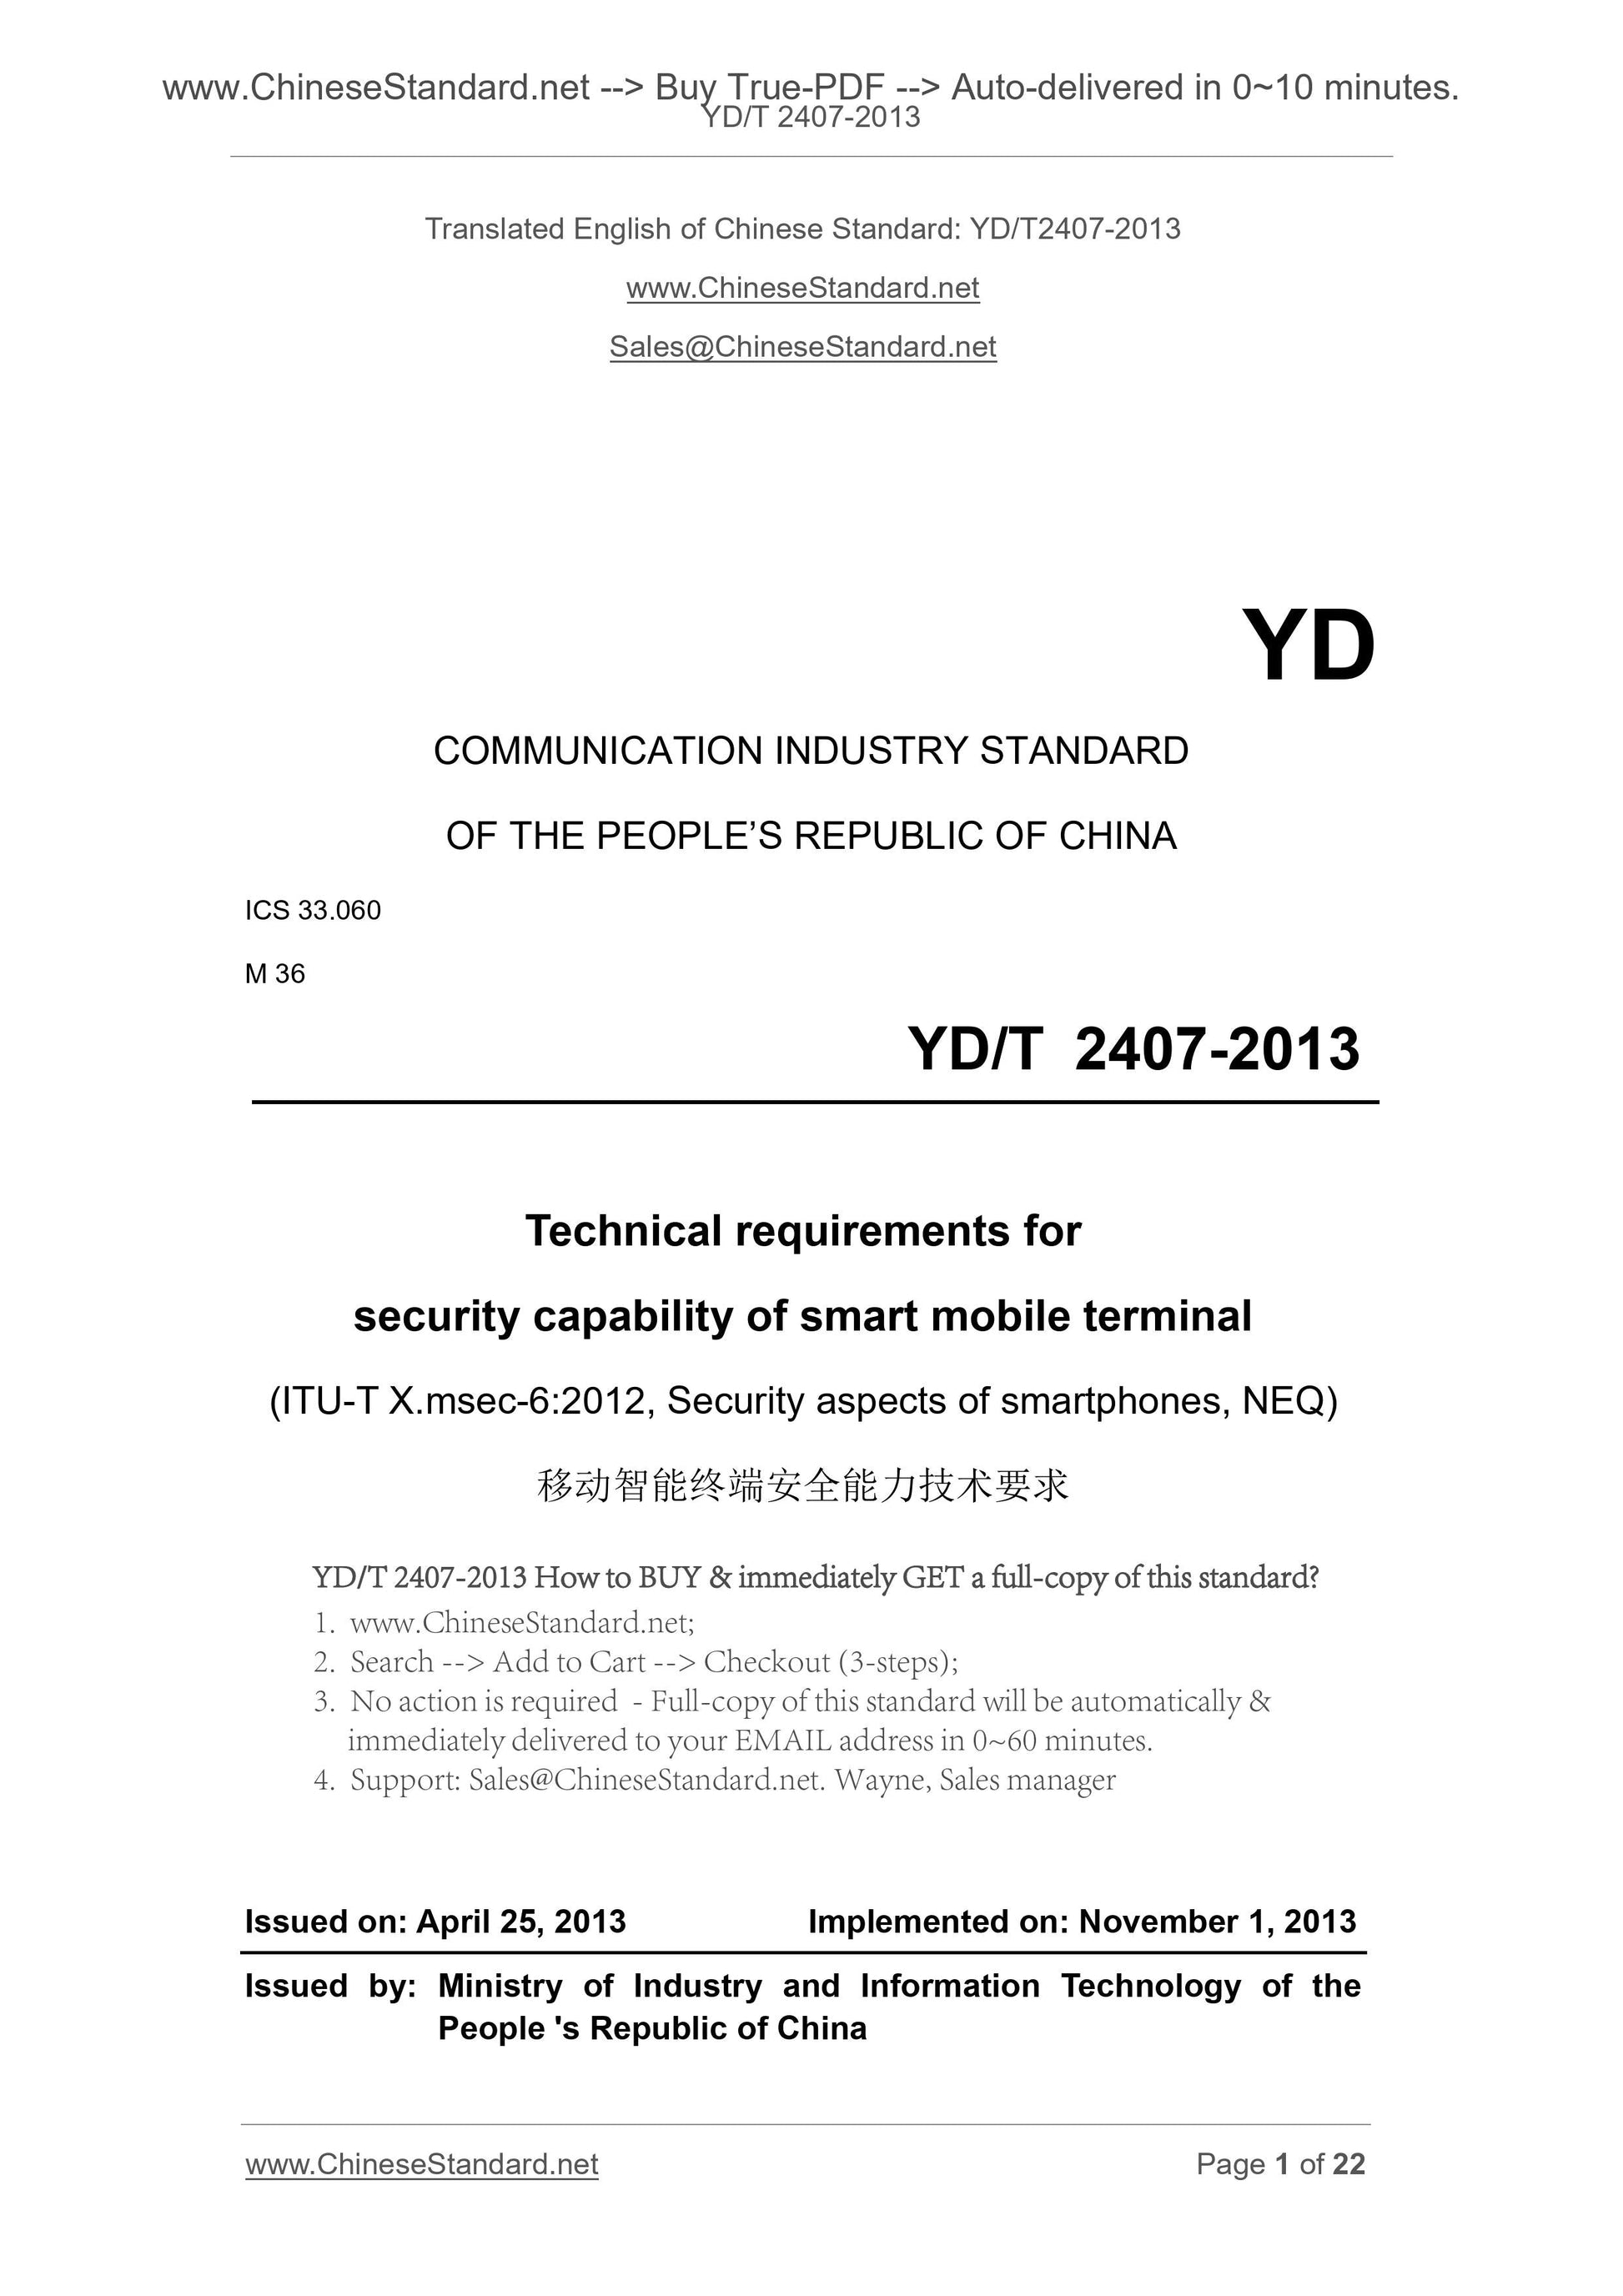 YD/T 2407-2013 Page 1